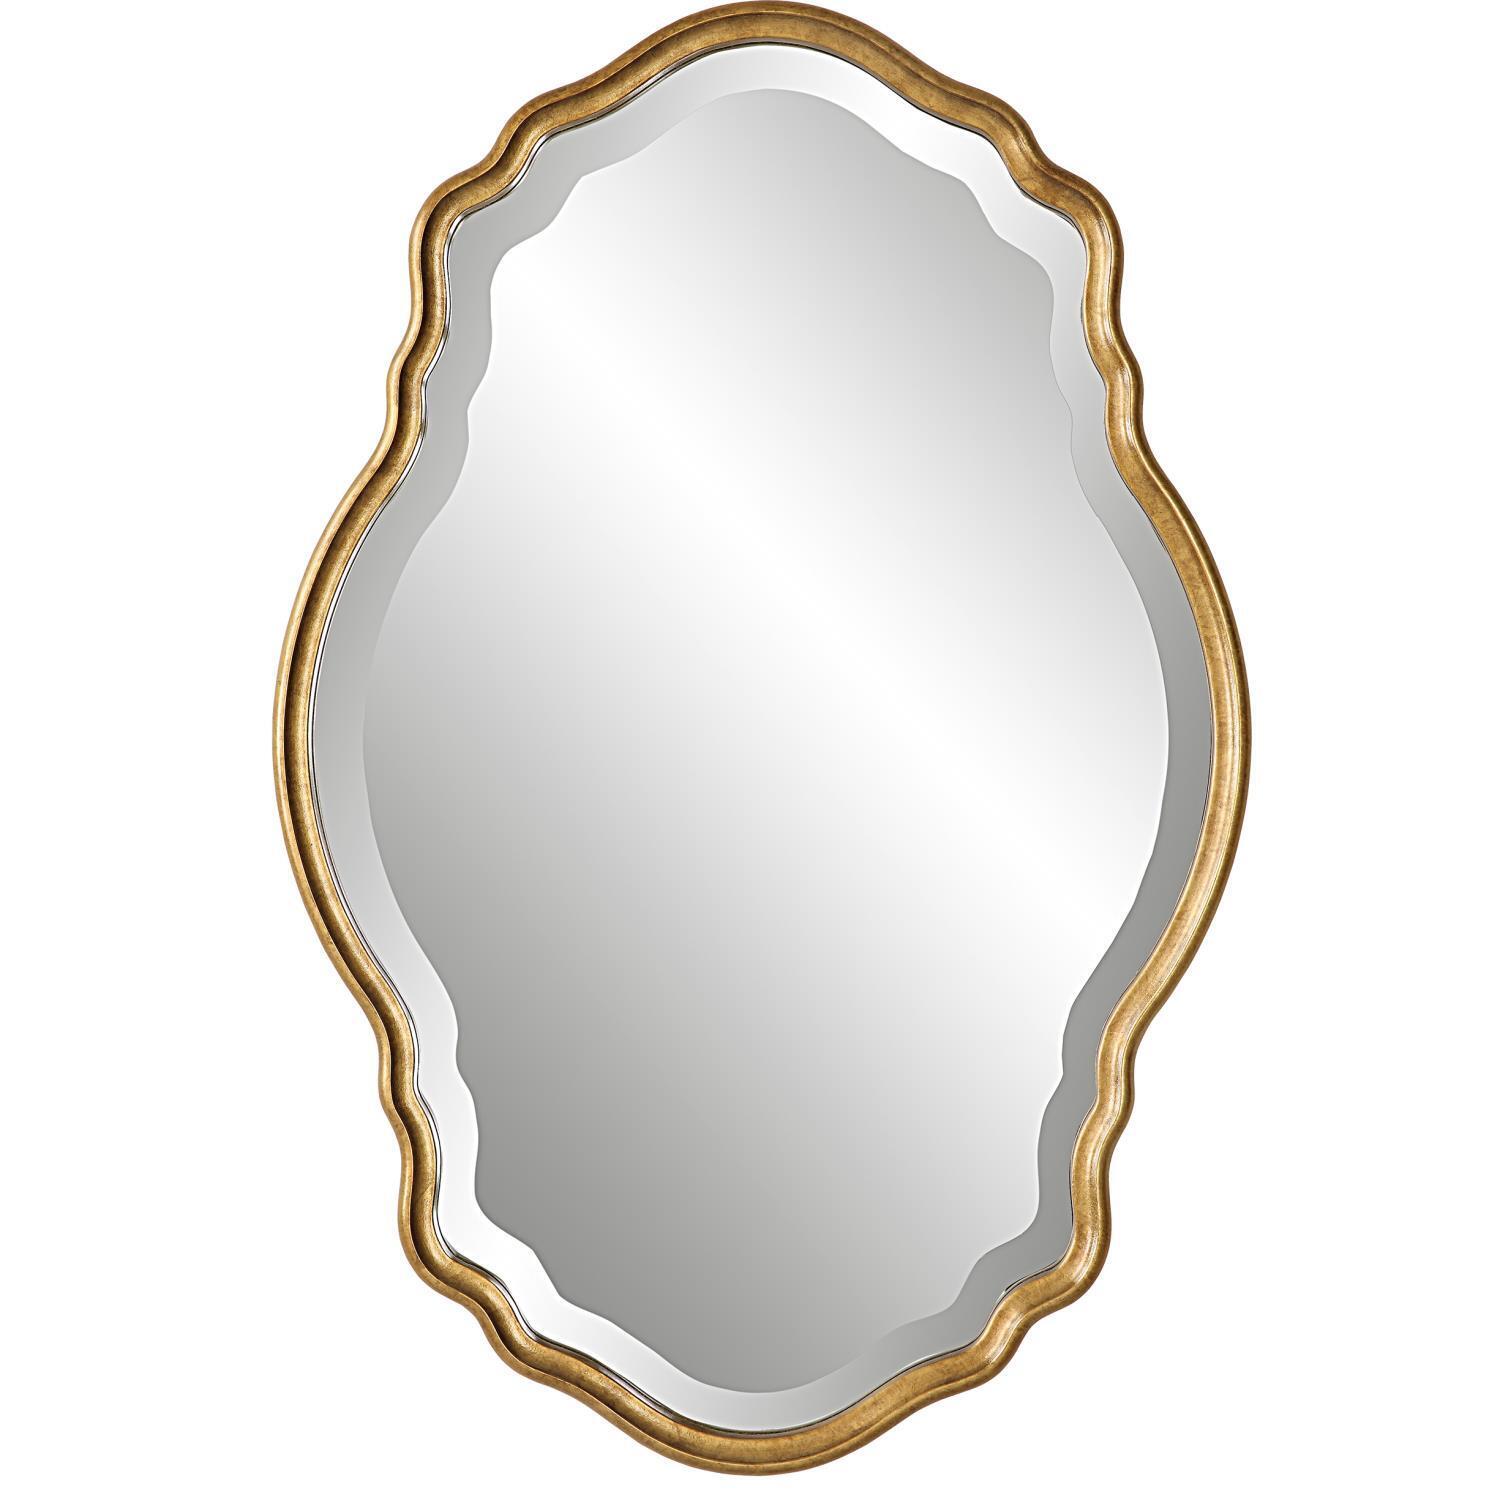 Uttermost Mdf And Glass Mirror With Gold Finish W00525